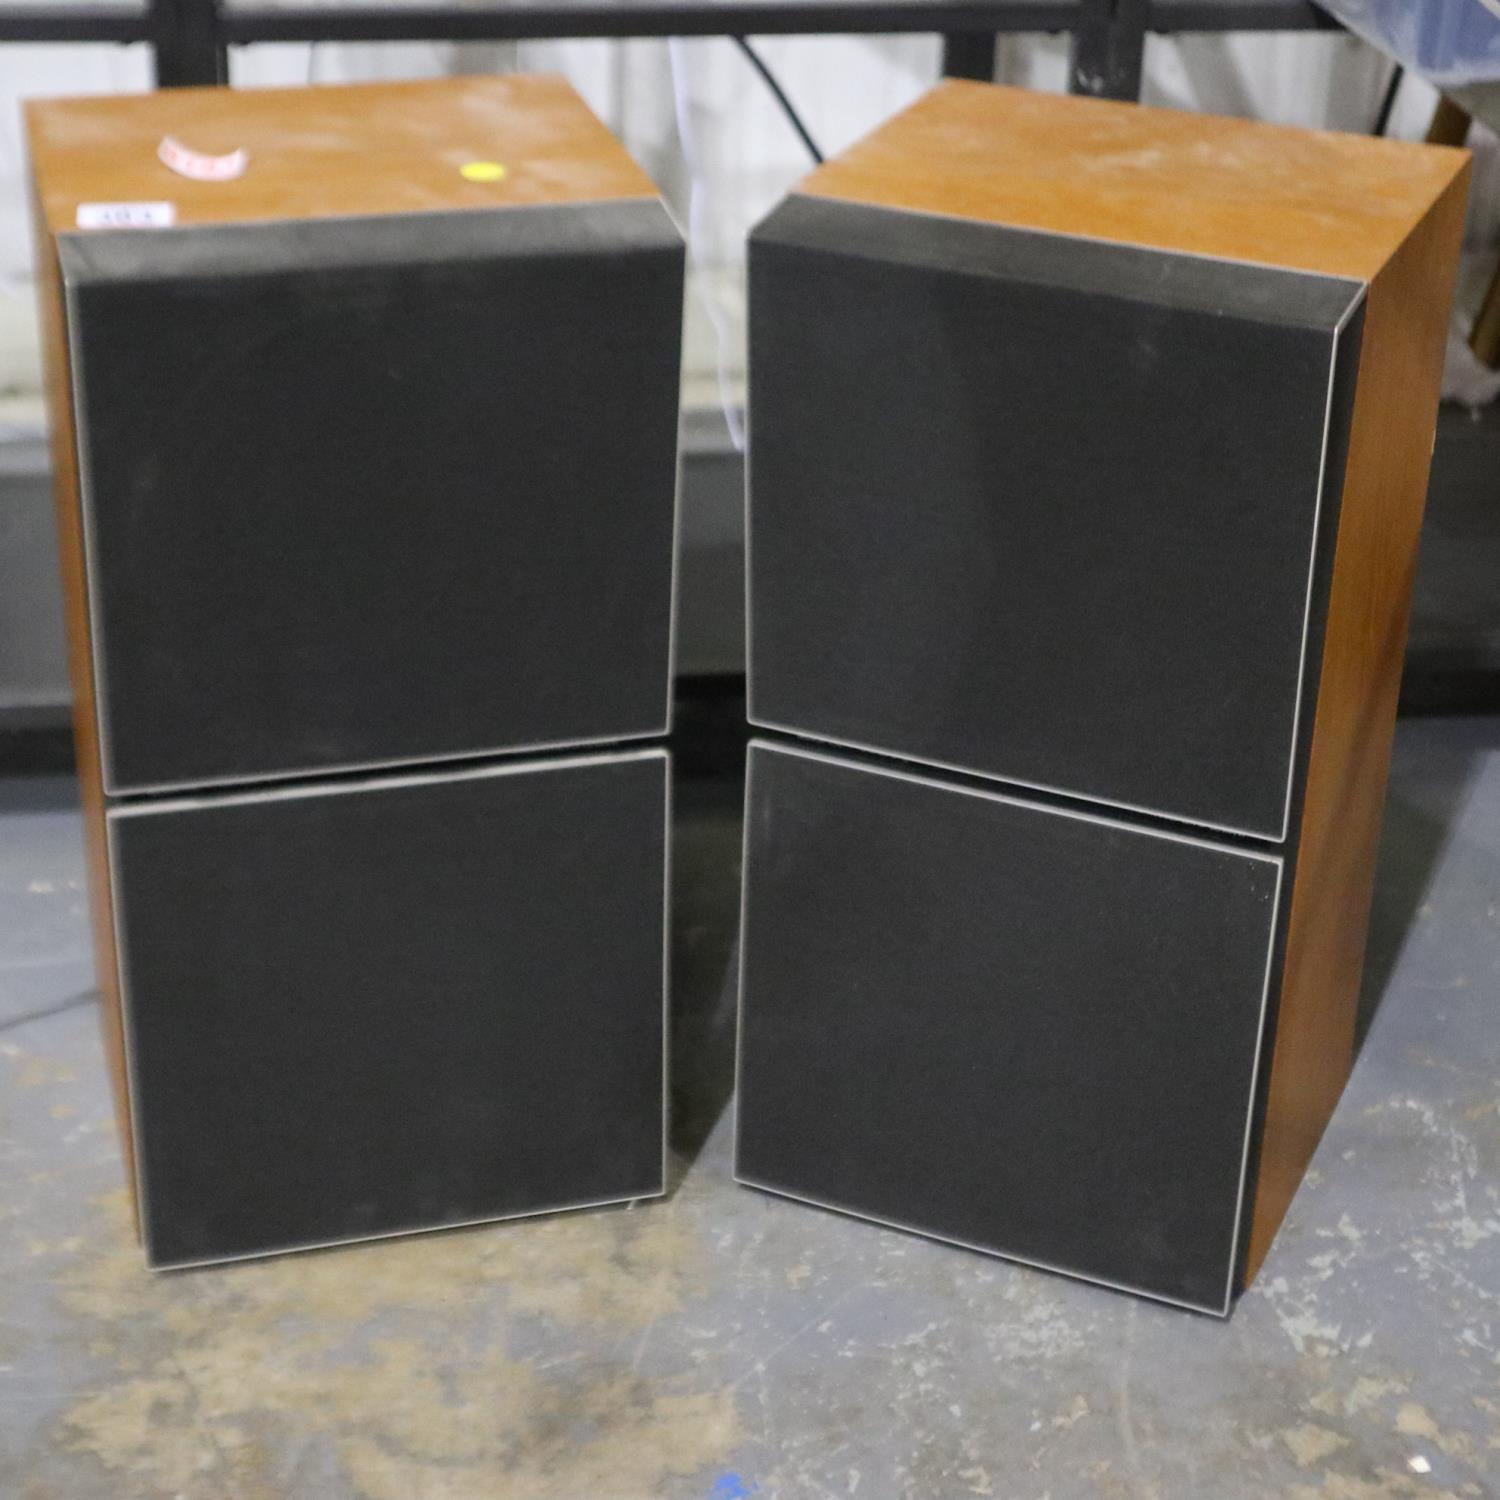 Pair of Bang & Olufsen Beovox 550 speakers. Not available for in-house P&P